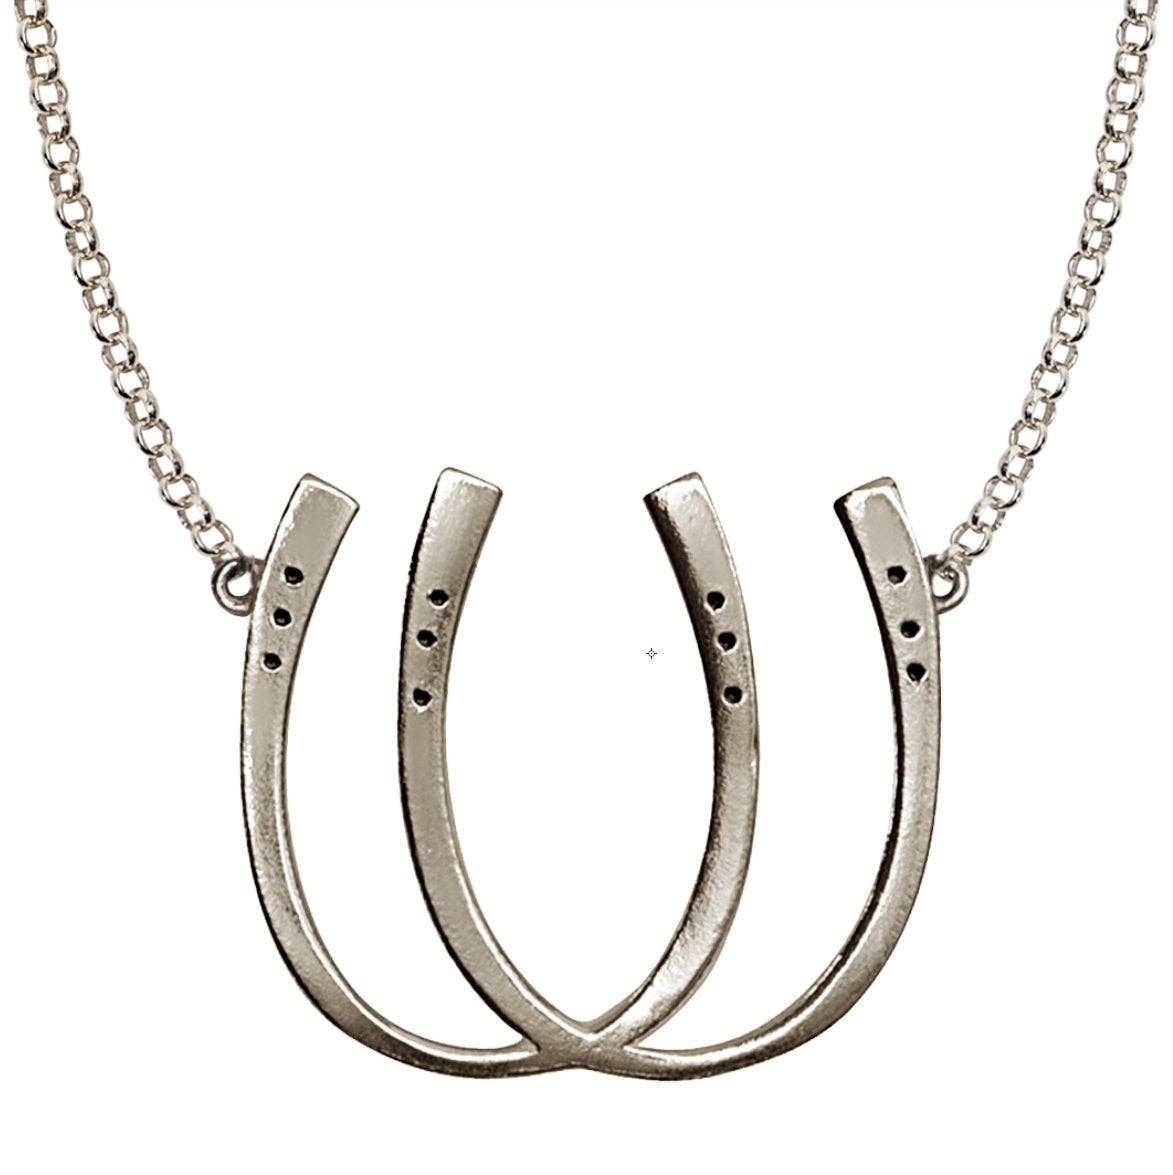 Double Luck Horseshoe Necklace - Silver